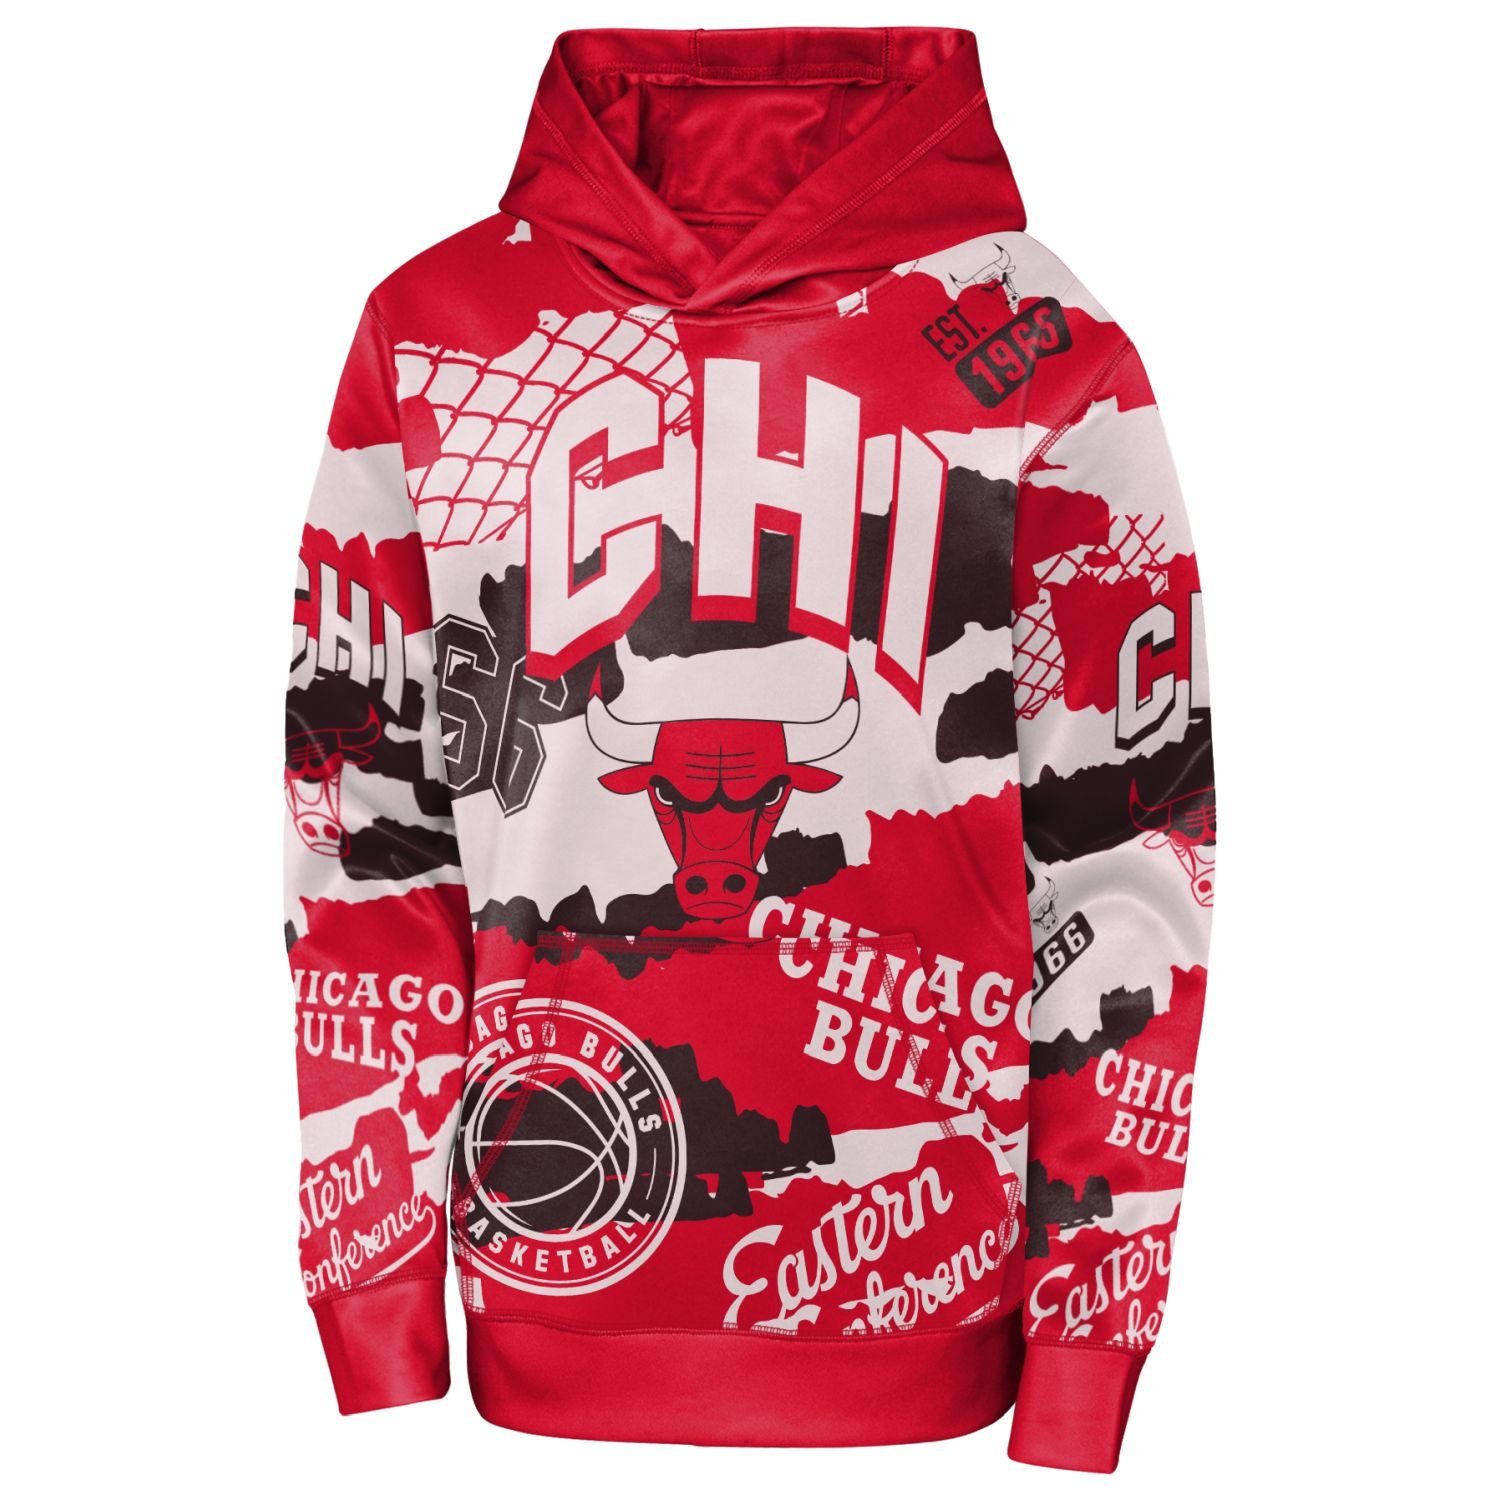 THE NBA Bulls Sublimated LIMIT Kapuzenpullover Outerstuff Chicago